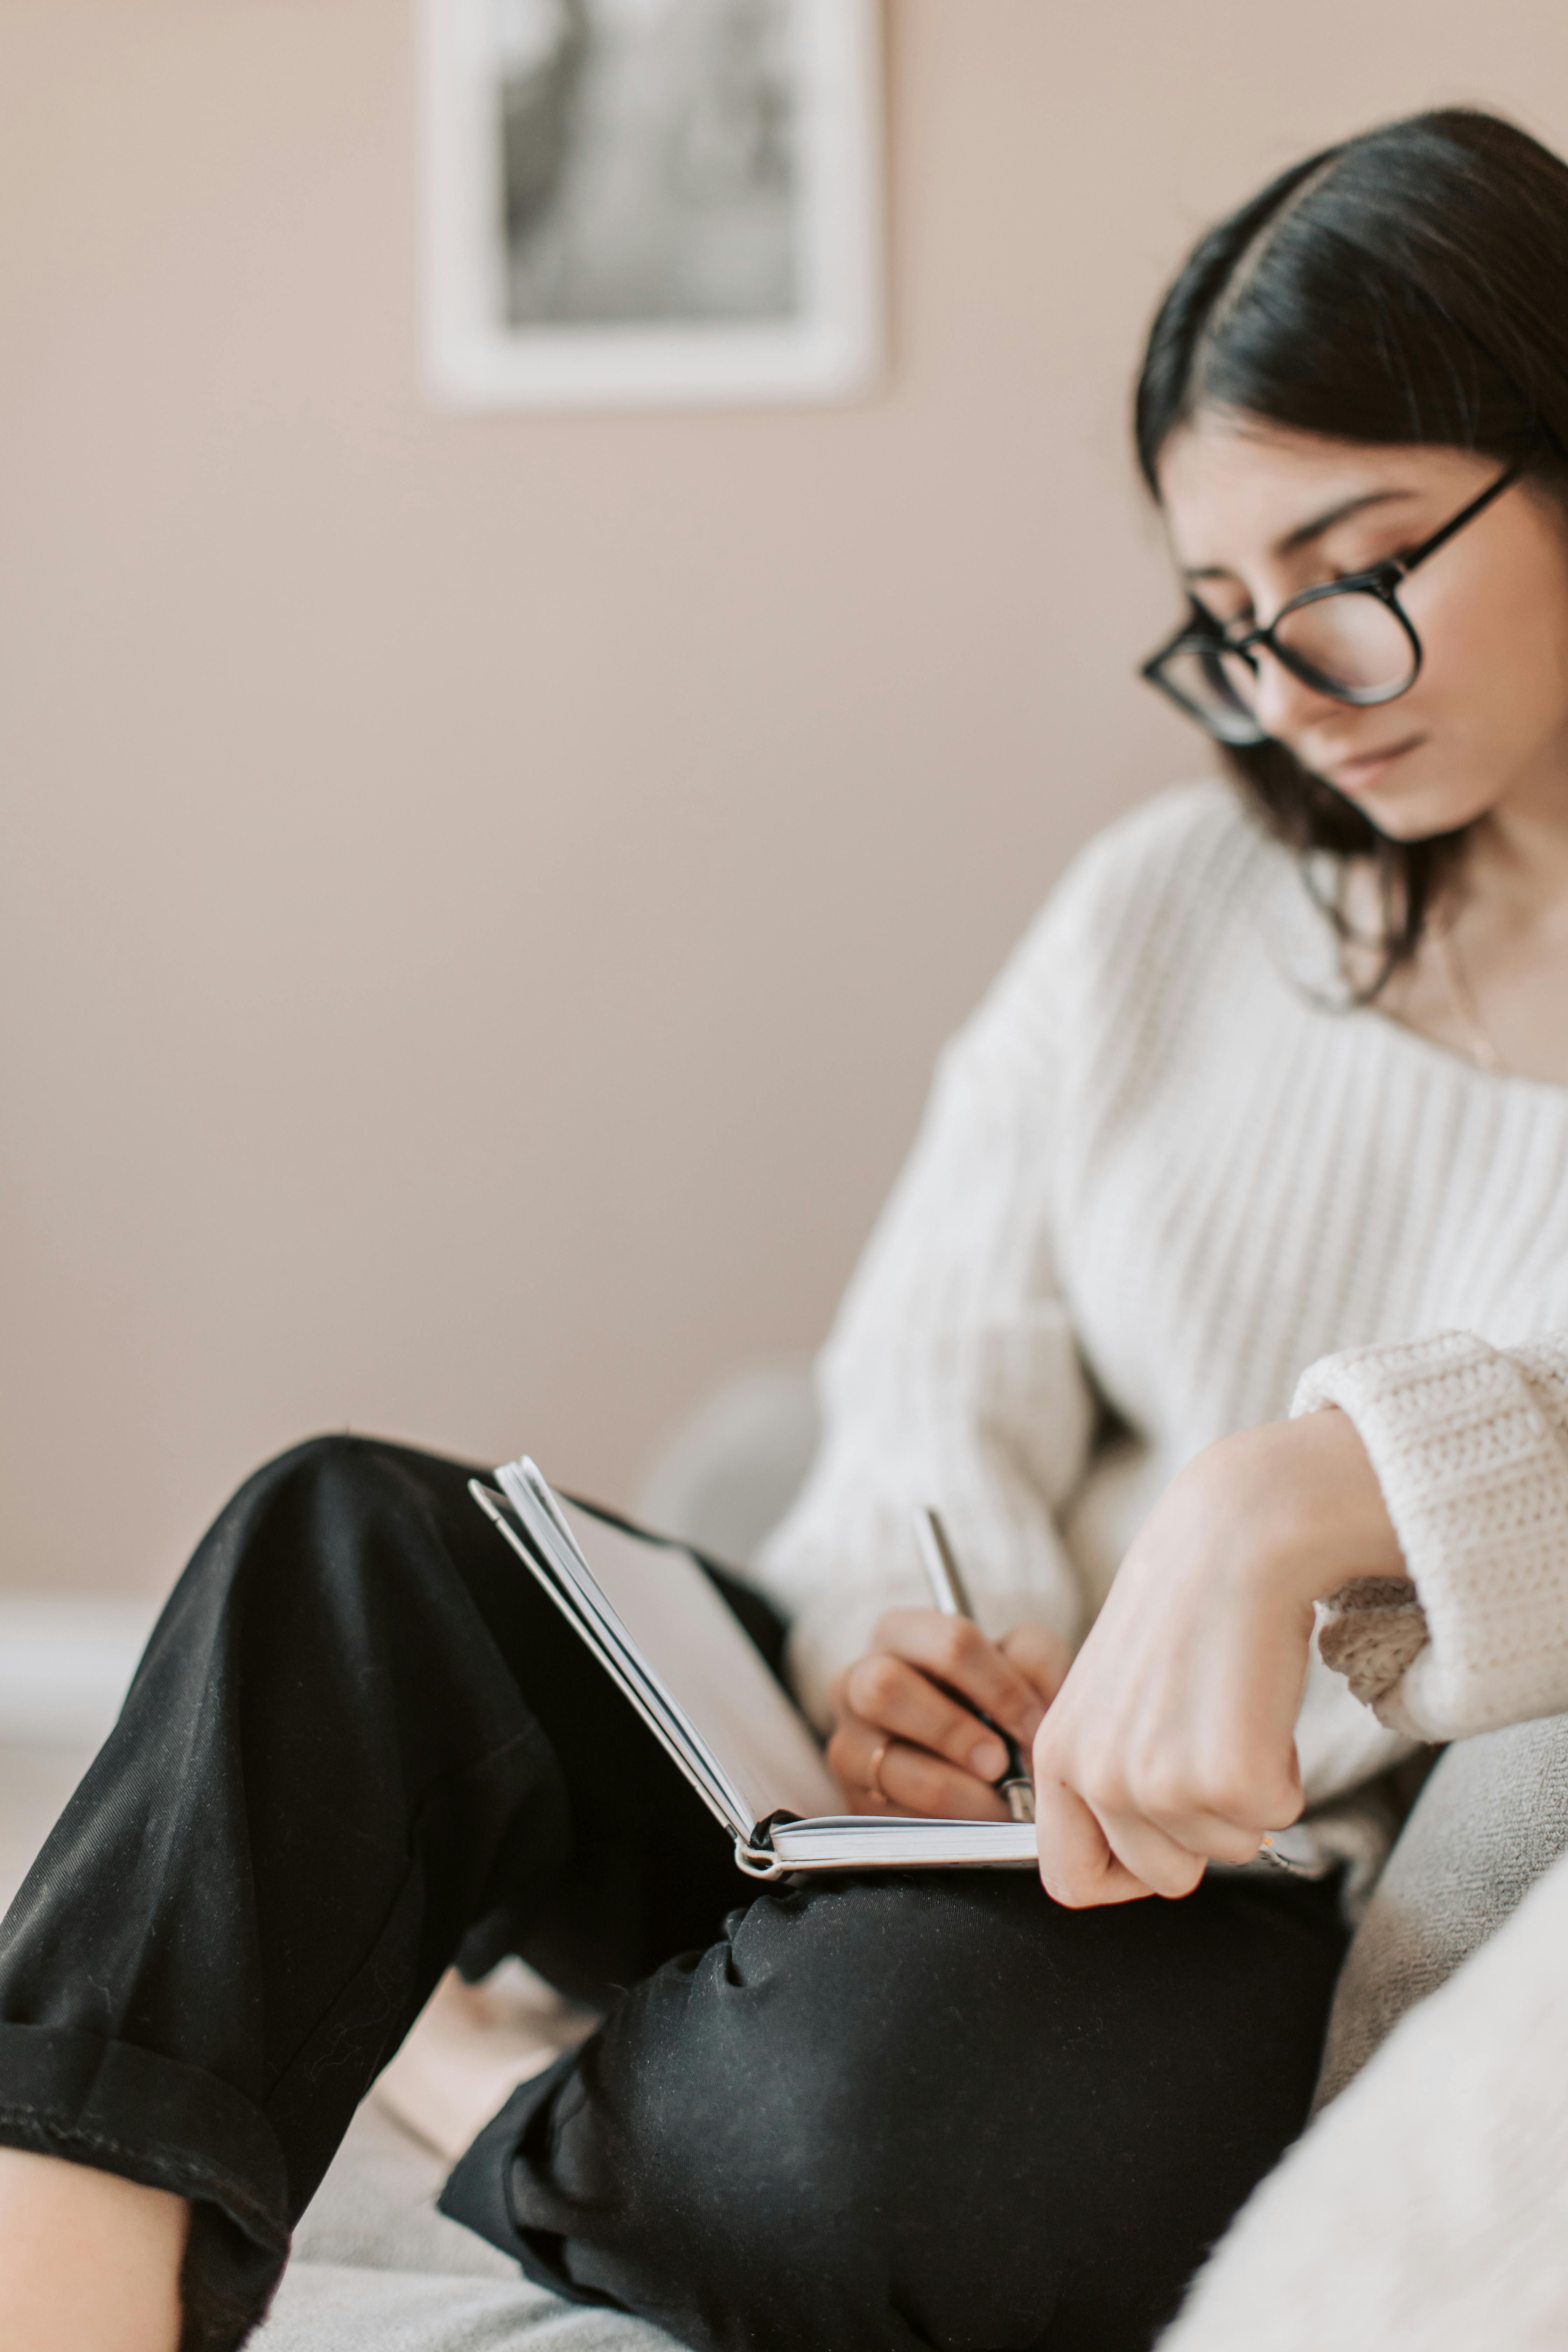 A woman writing in a journal | Source: Pexels